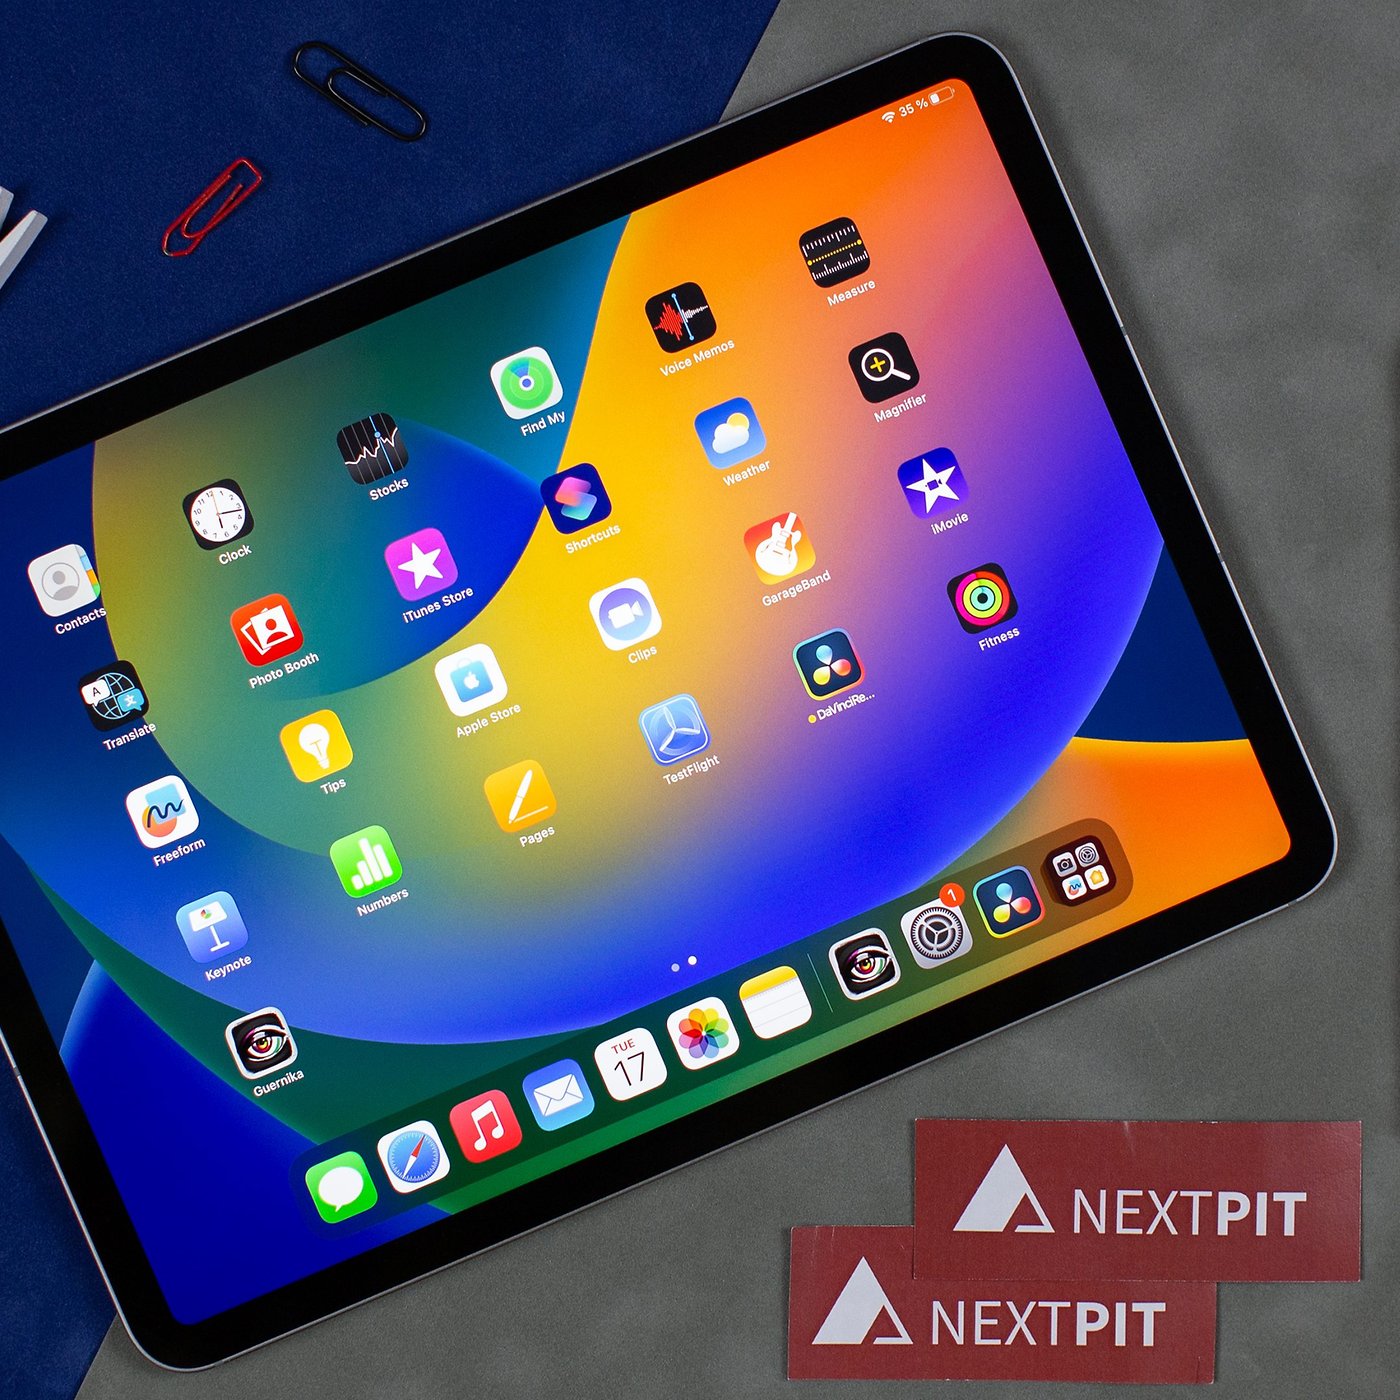 Apple's iPad refresh next year could bring OLED iPad Pros and a